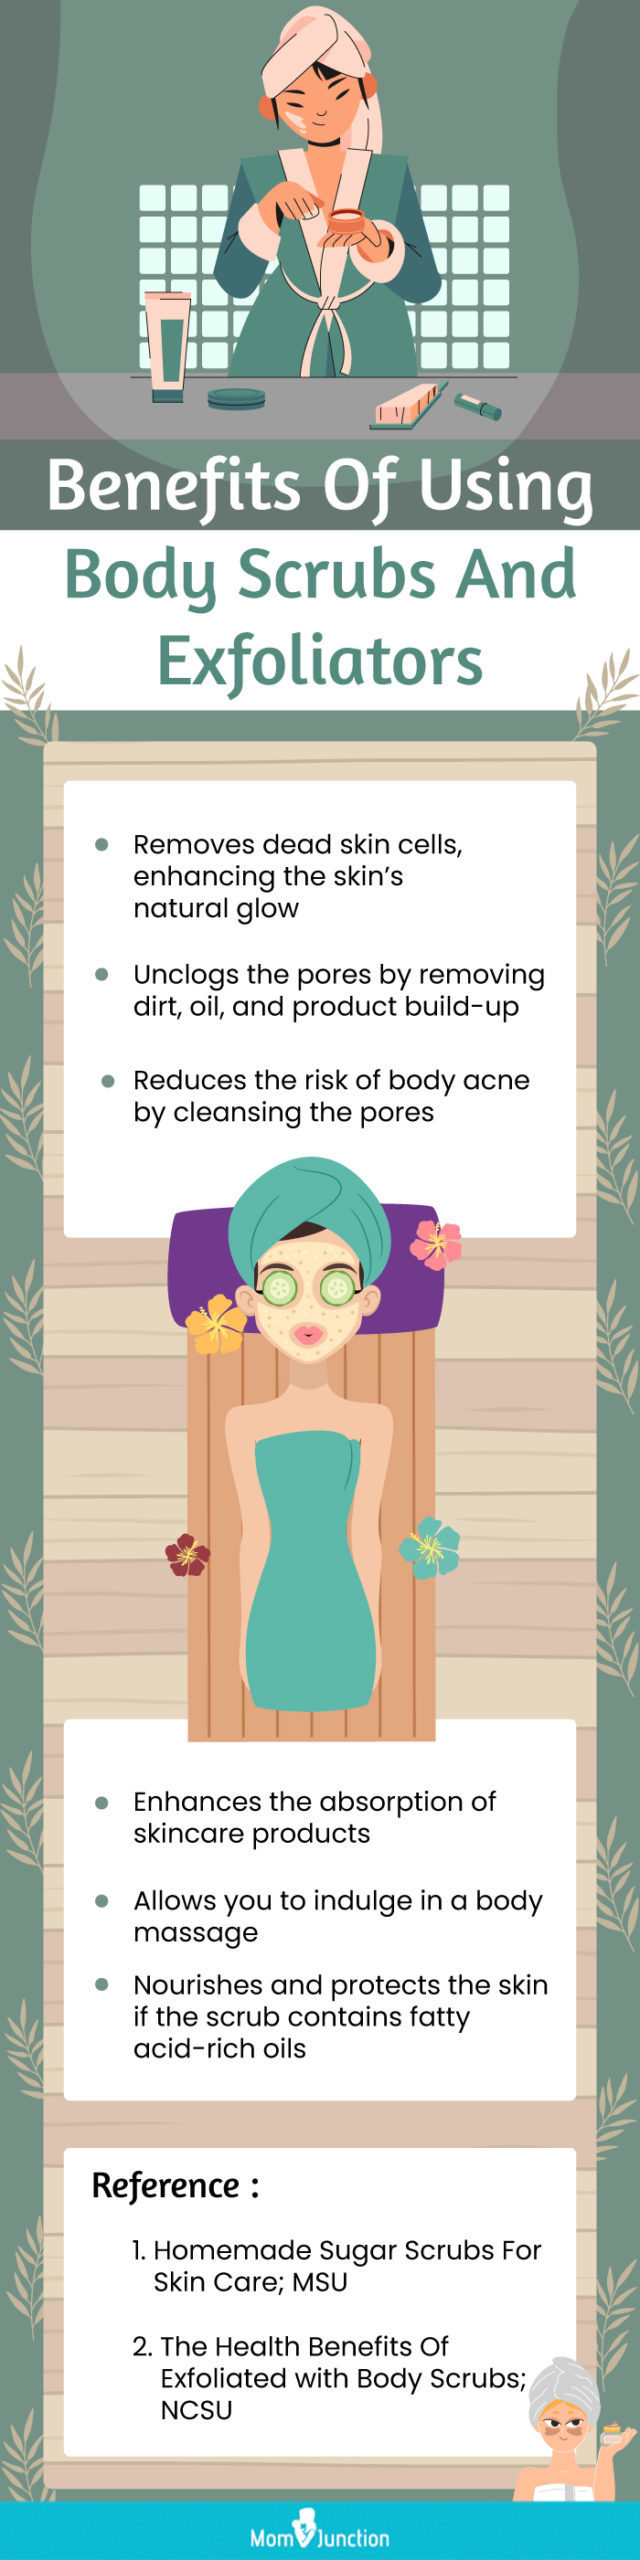 Benefits Of Using Body Scrubs And Exfoliators (infographic)